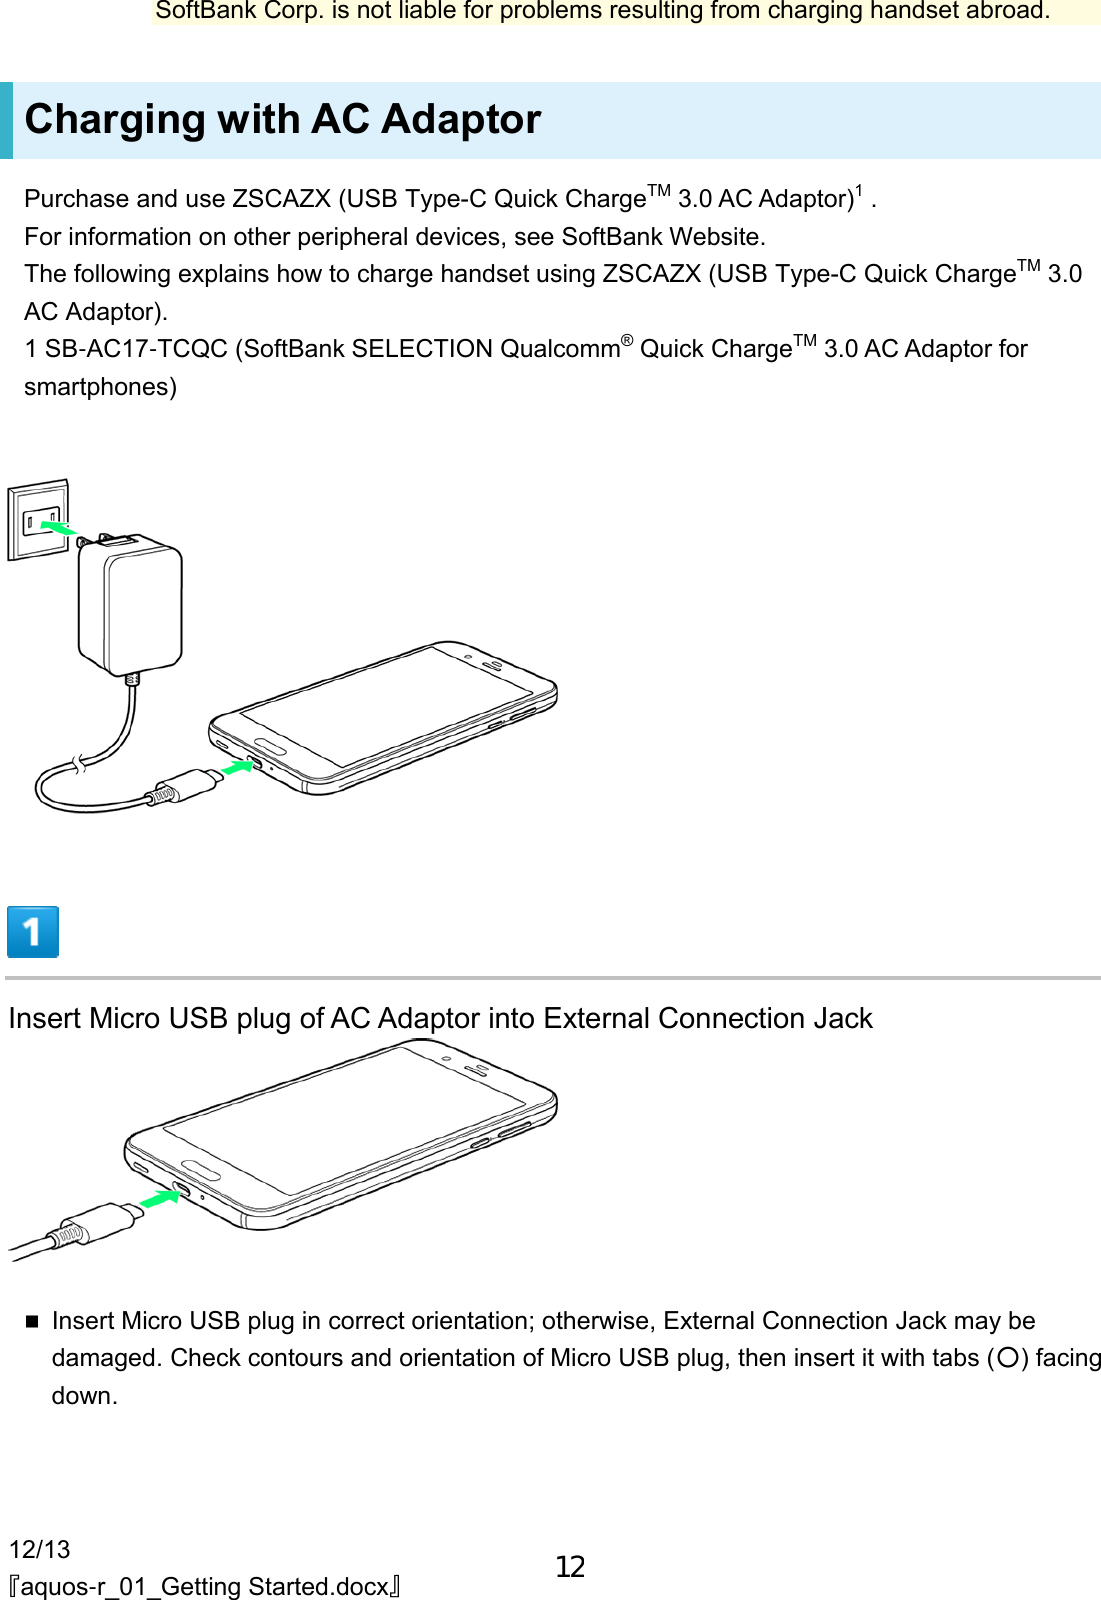 12/13 『aquos-r_01_Getting Started.docx』 SoftBank Corp. is not liable for problems resulting from charging handset abroad. Charging with AC Adaptor Purchase and use ZSCAZX (USB Type-C Quick ChargeTM 3.0 AC Adaptor)1 . For information on other peripheral devices, see SoftBank Website. The following explains how to charge handset using ZSCAZX (USB Type-C Quick ChargeTM 3.0 AC Adaptor). 1 SB-AC17-TCQC (SoftBank SELECTION Qualcomm® Quick ChargeTM 3.0 AC Adaptor for smartphones)  Insert Micro USB plug of AC Adaptor into External Connection Jack Insert Micro USB plug in correct orientation; otherwise, External Connection Jack may bedamaged. Check contours and orientation of Micro USB plug, then insert it with tabs (○) facingdown.12